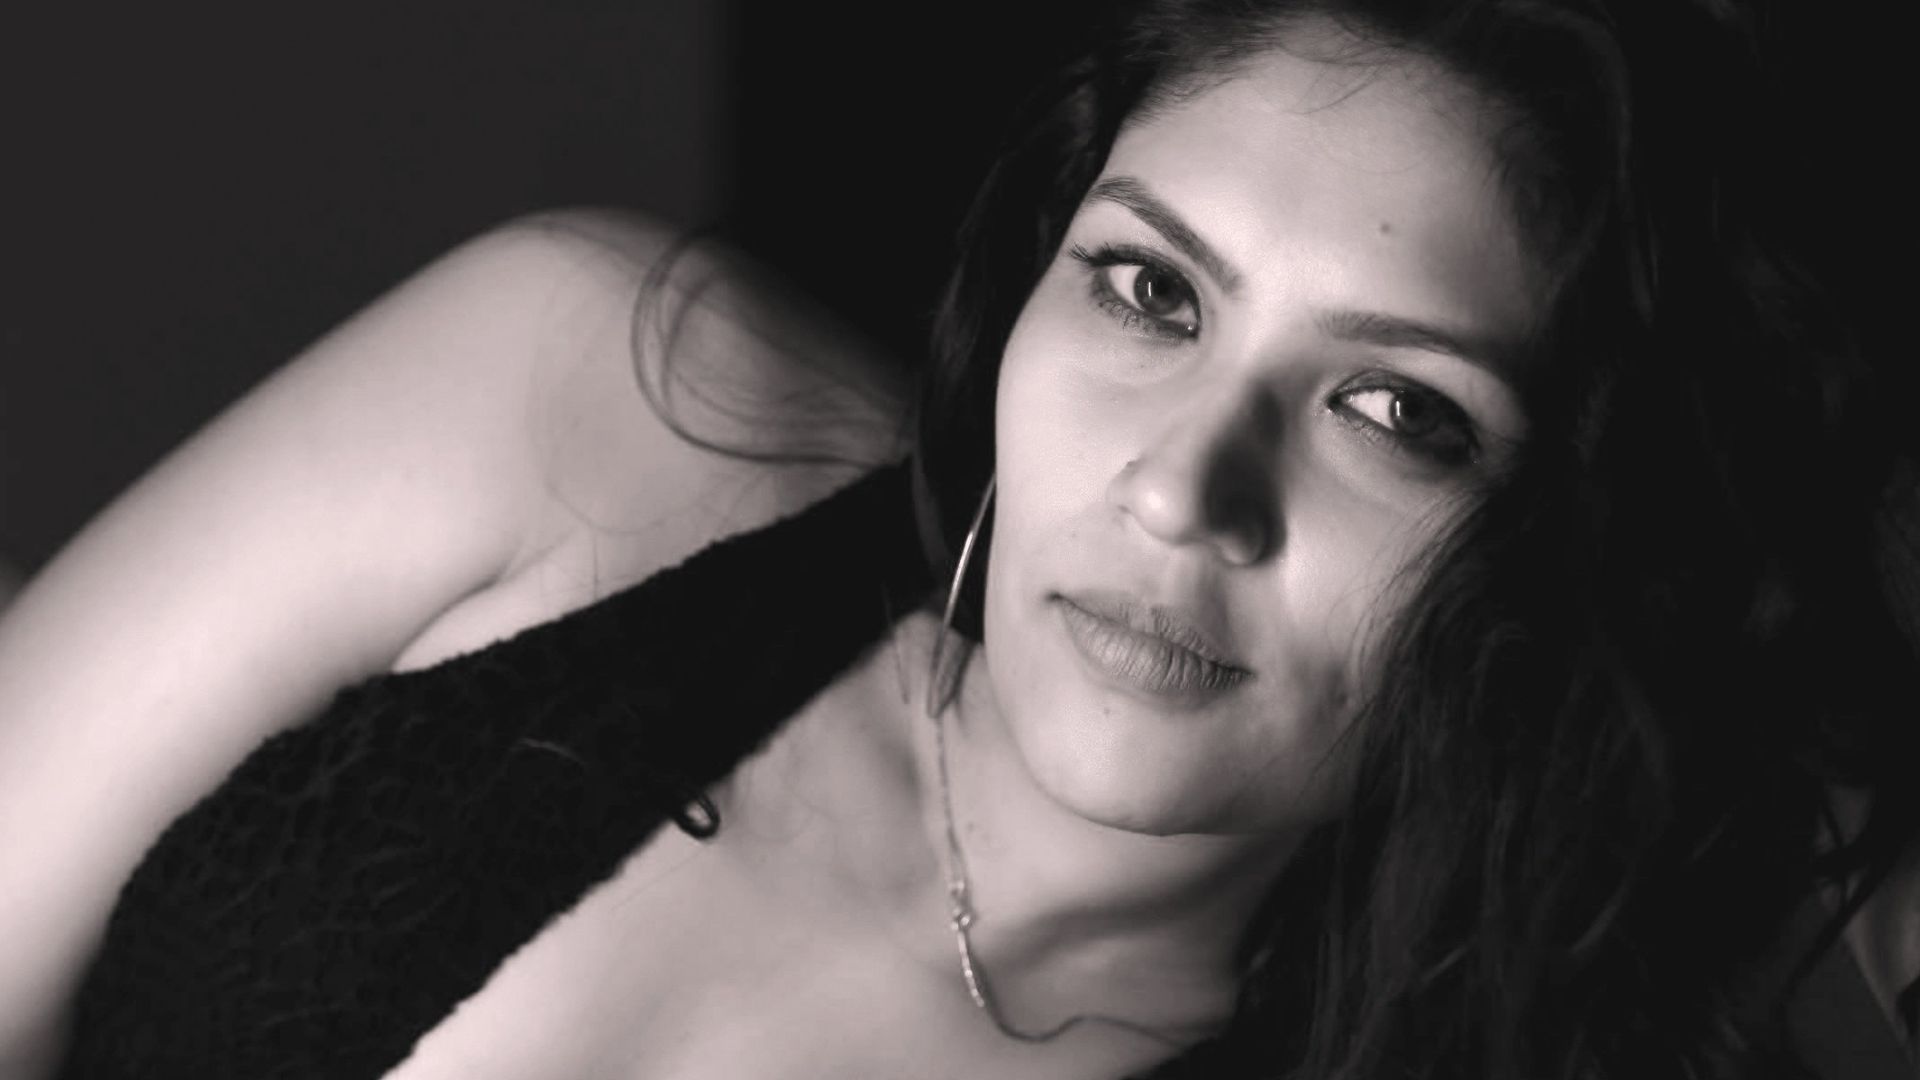 Shruti Bapna - An Indian Actress Who Has Worked In Commercial Films, Web Series, And TV Shows